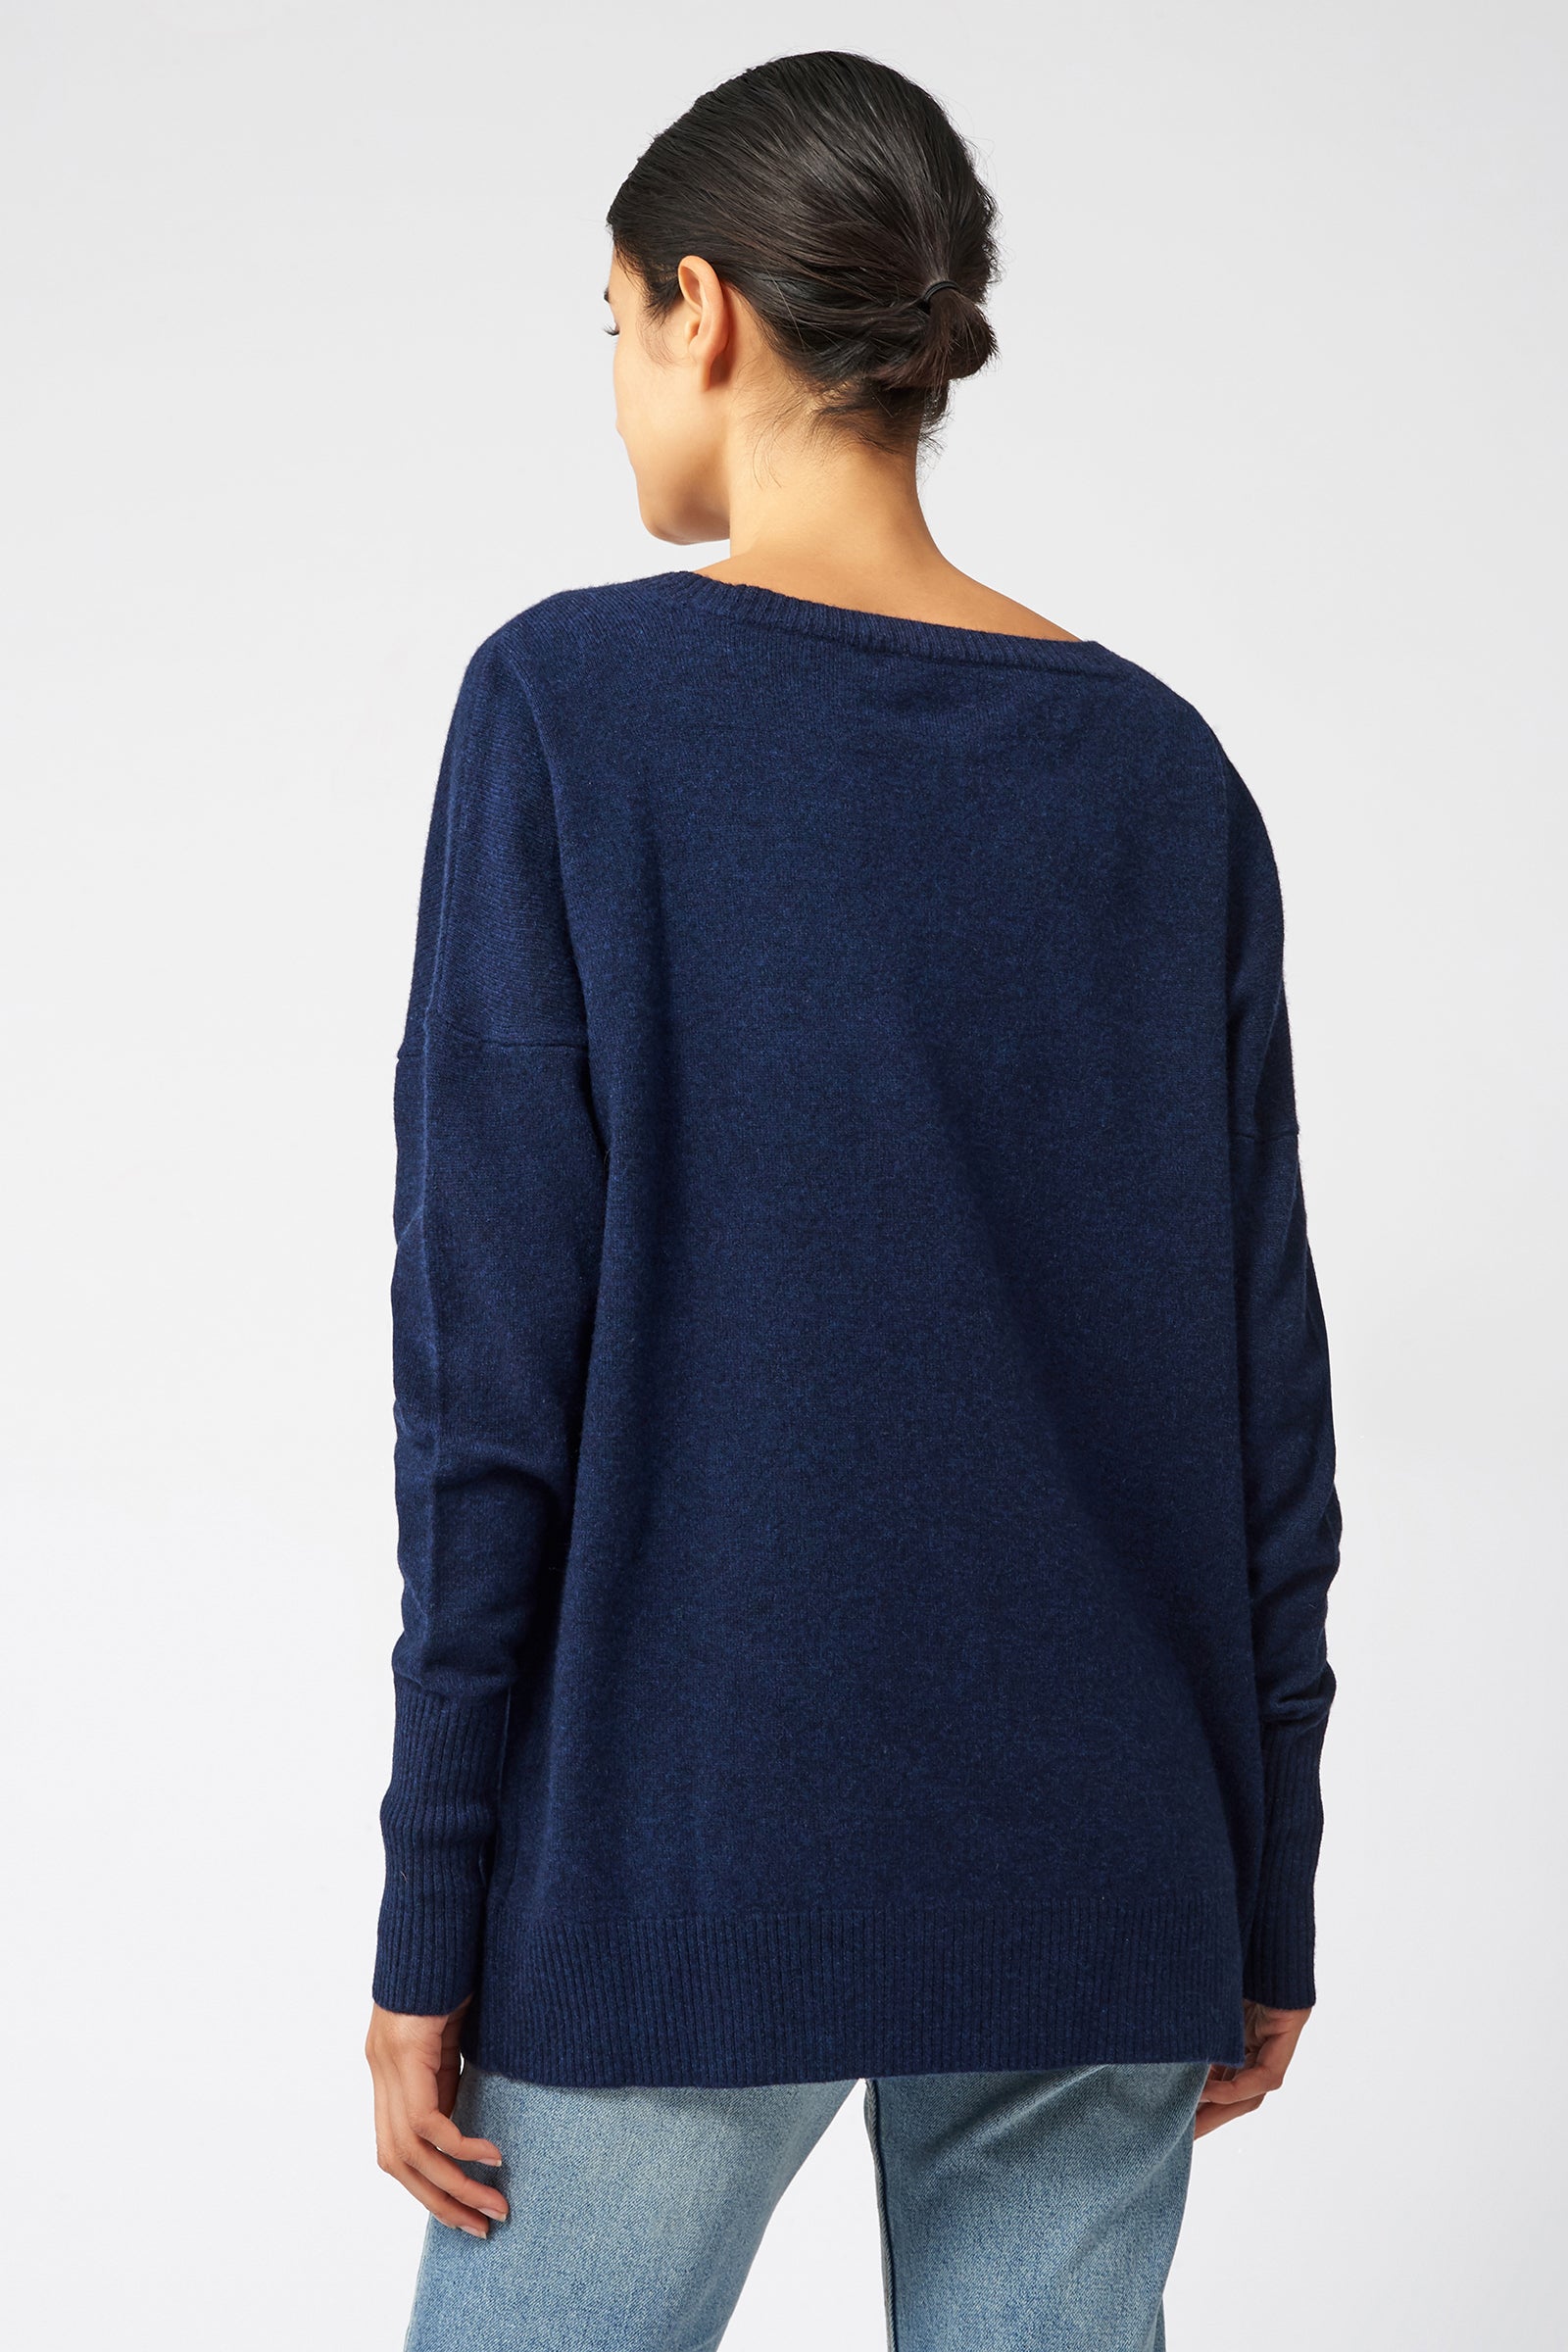 Kal Rieman Cashmere V Neck in Navy on Model Front View